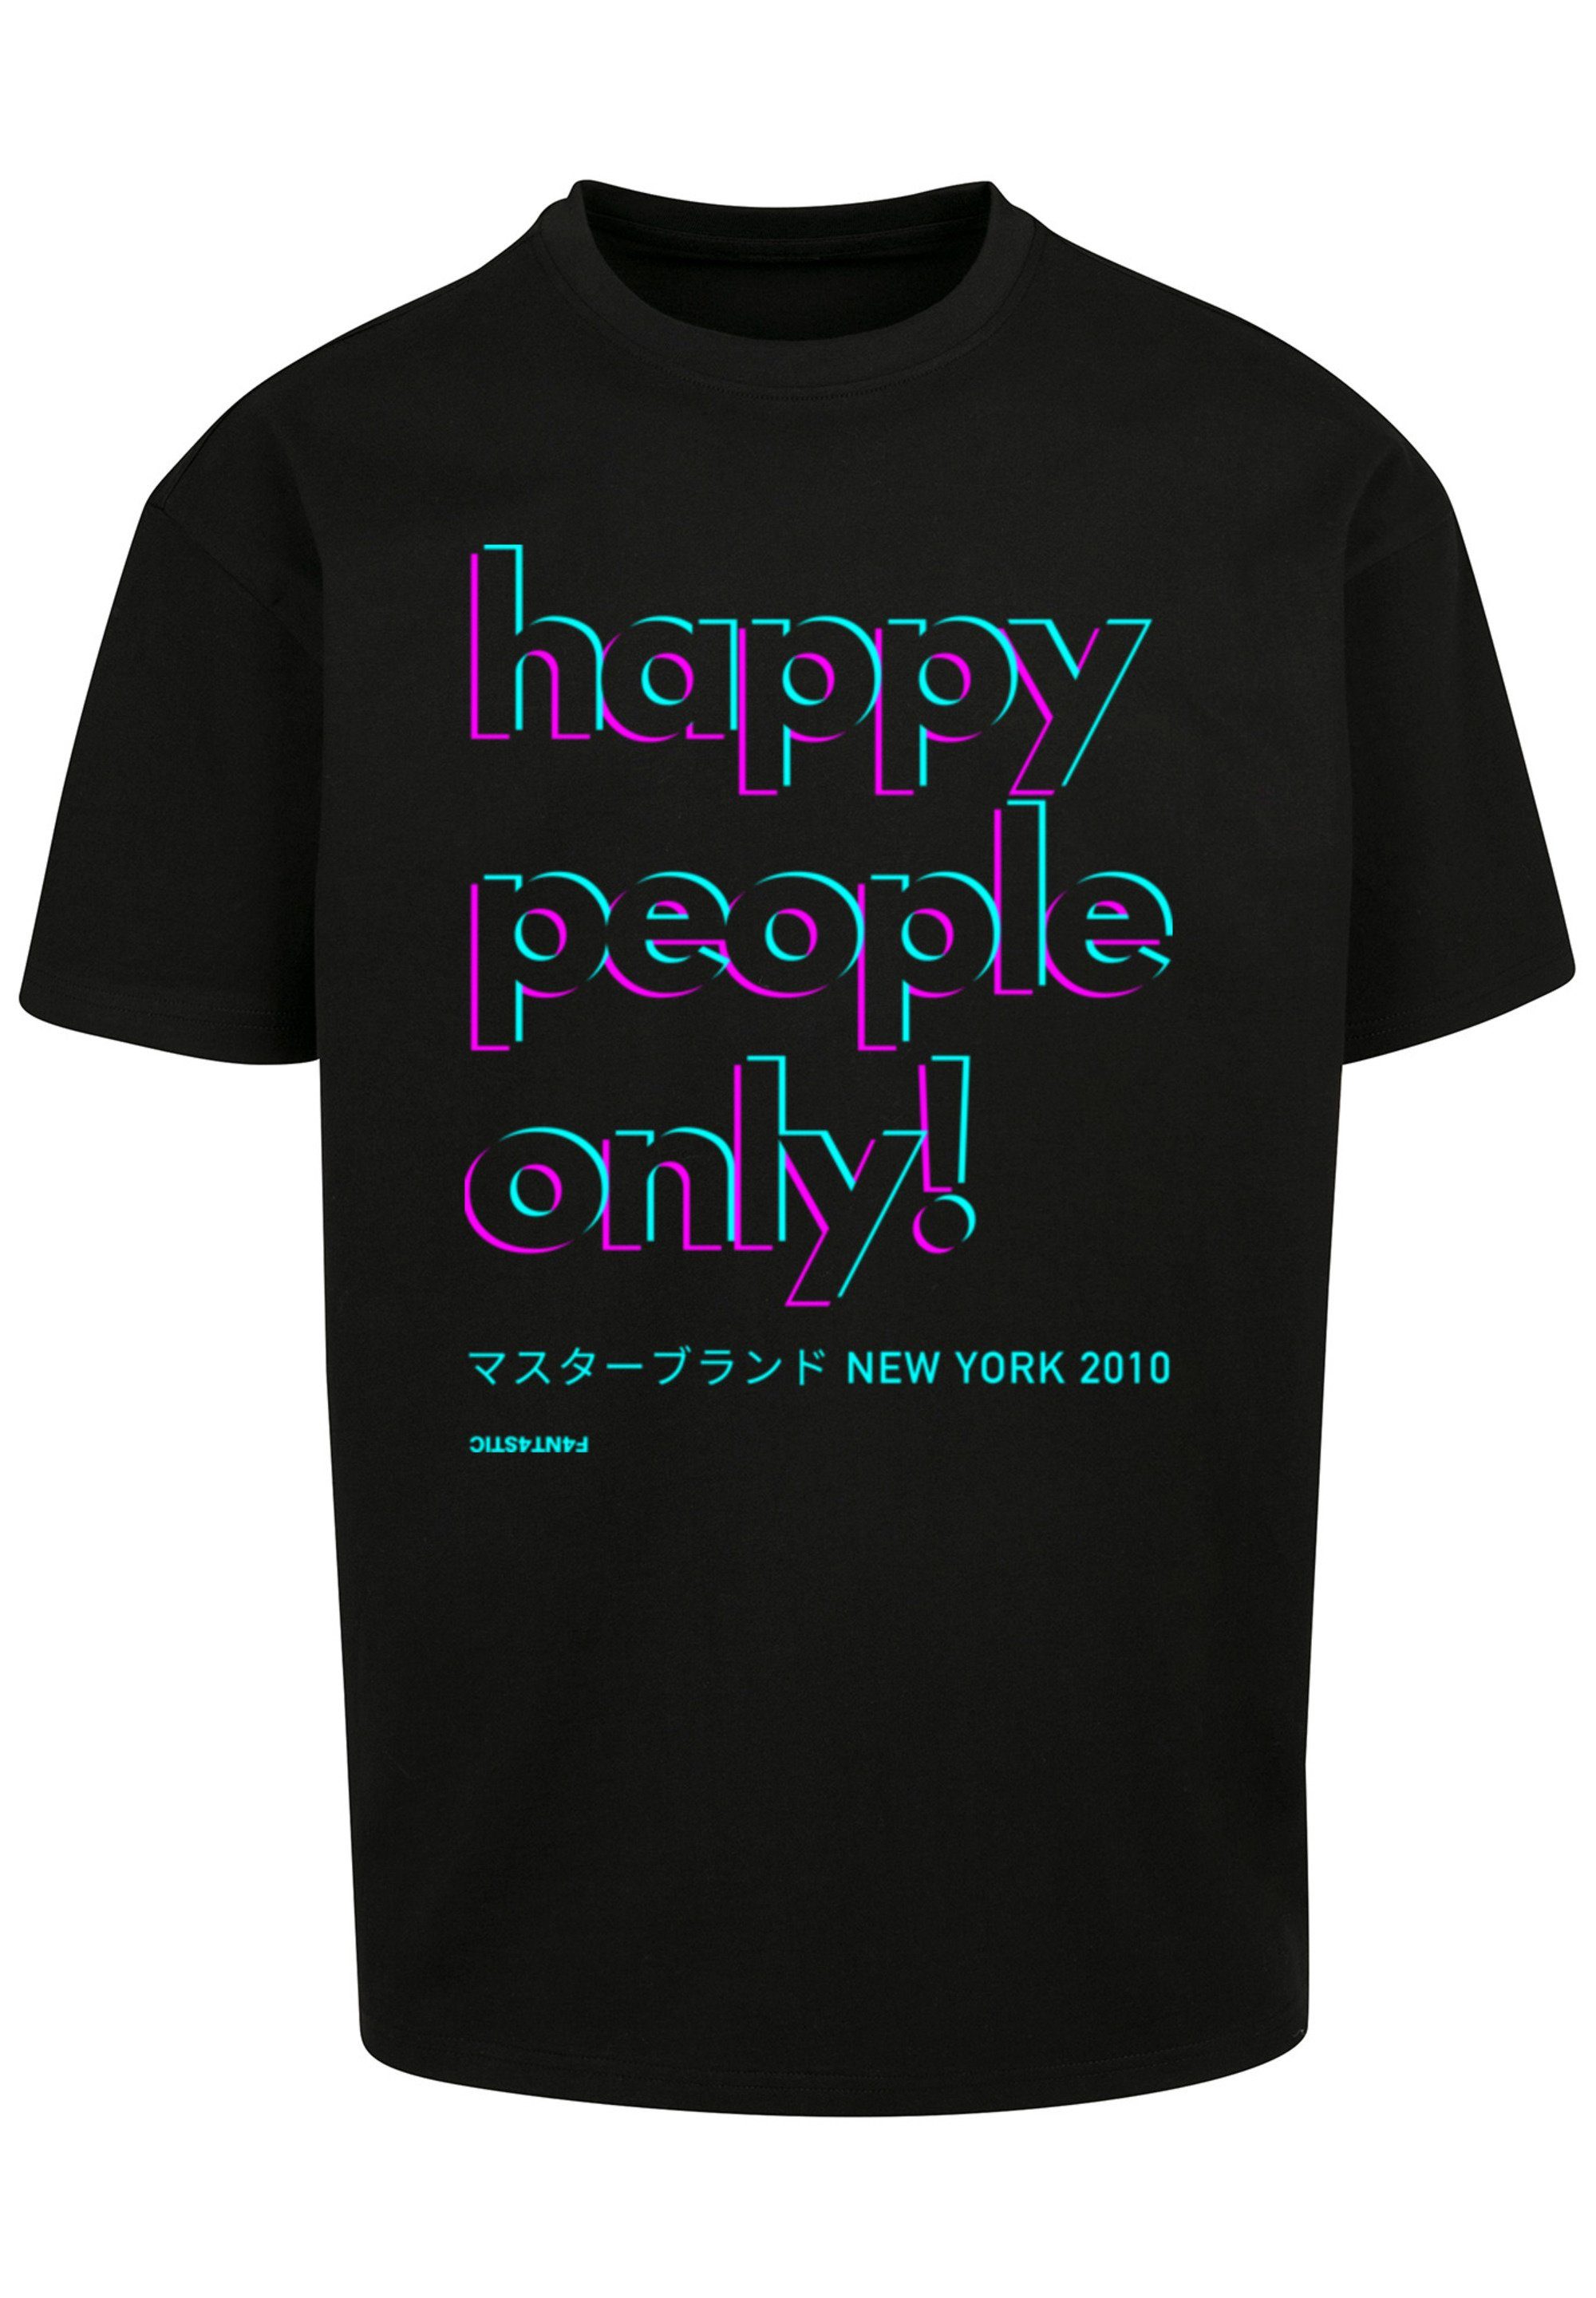 F4NT4STIC T-Shirt people only schwarz York Print Happy New